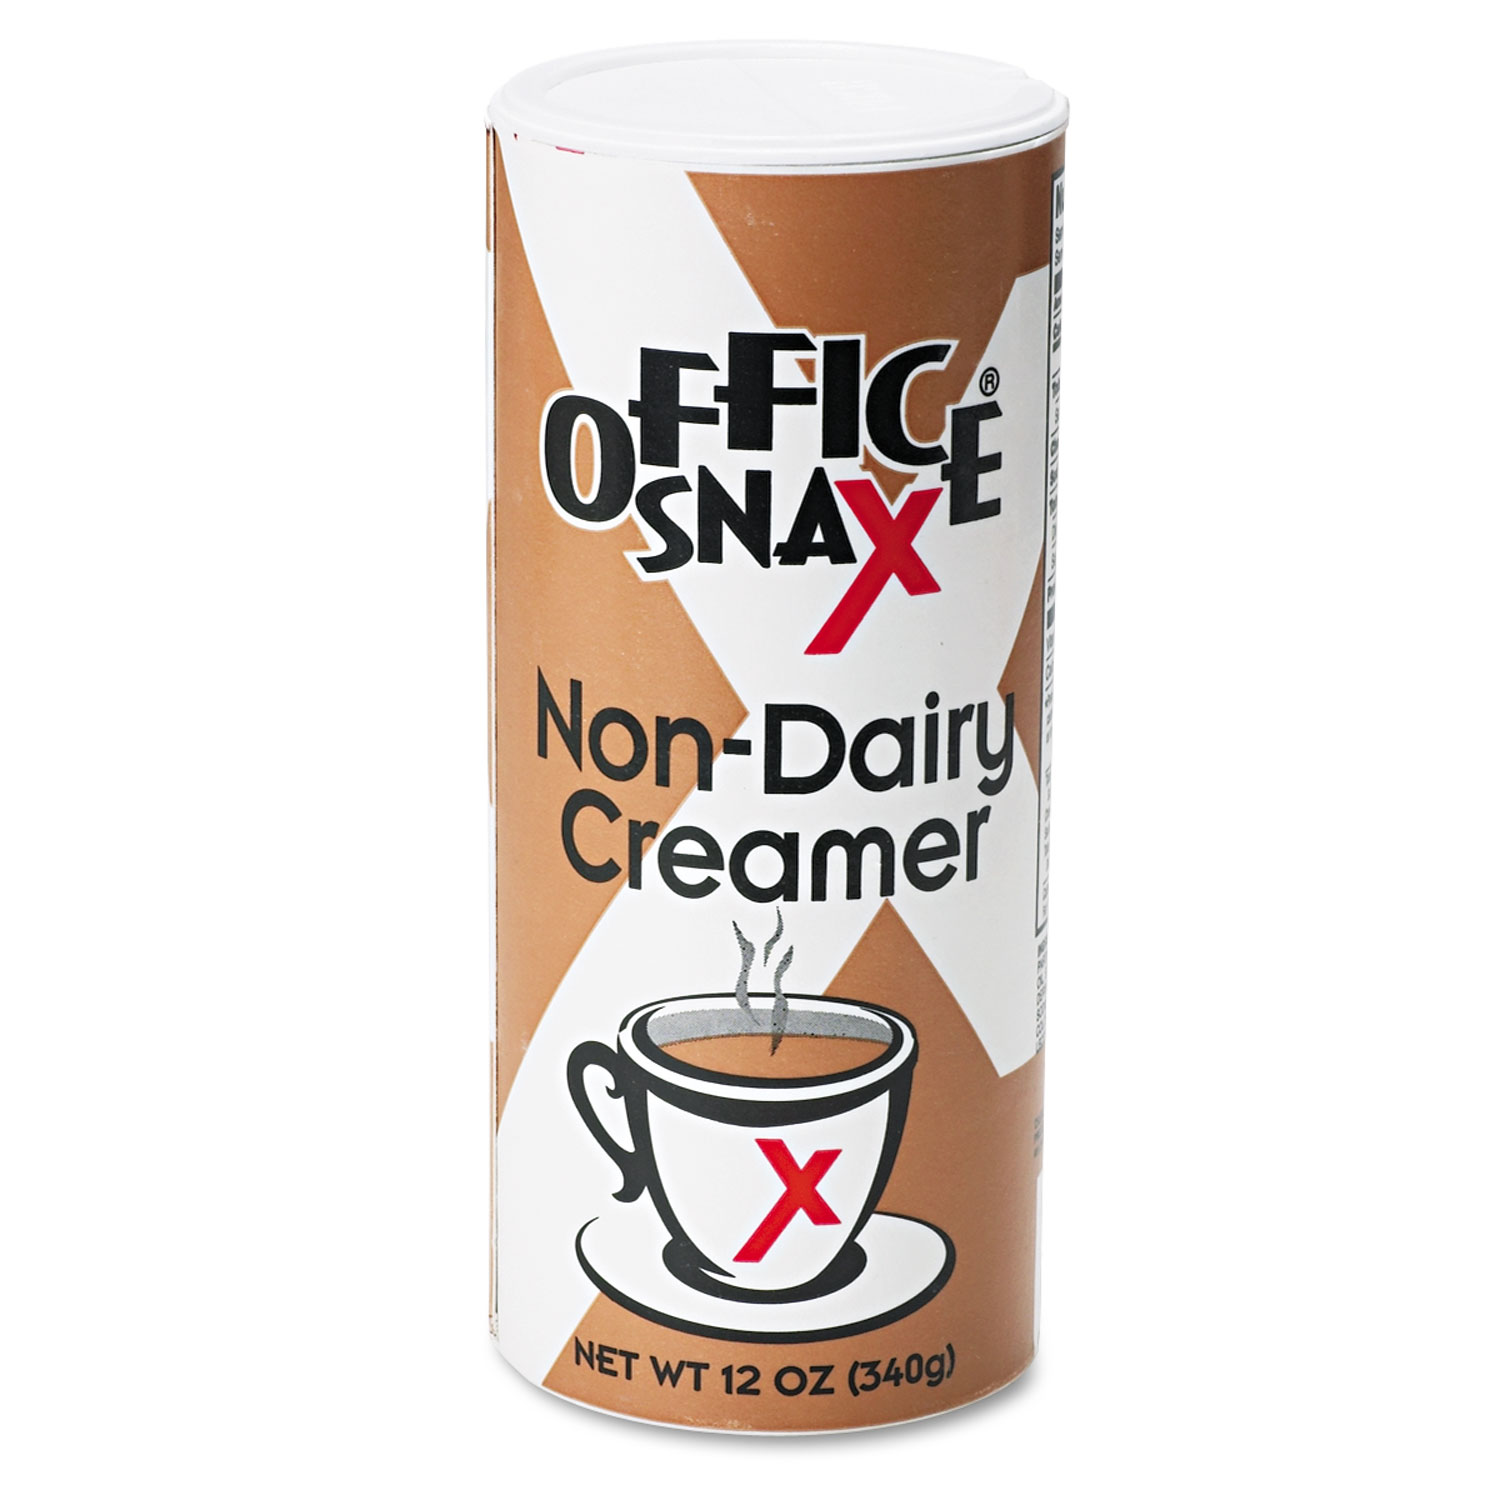  Office Snax 0020CT Reclosable Canister of Powder Non-Dairy Creamer, 12oz, 24/Carton (OFX00020CT) 